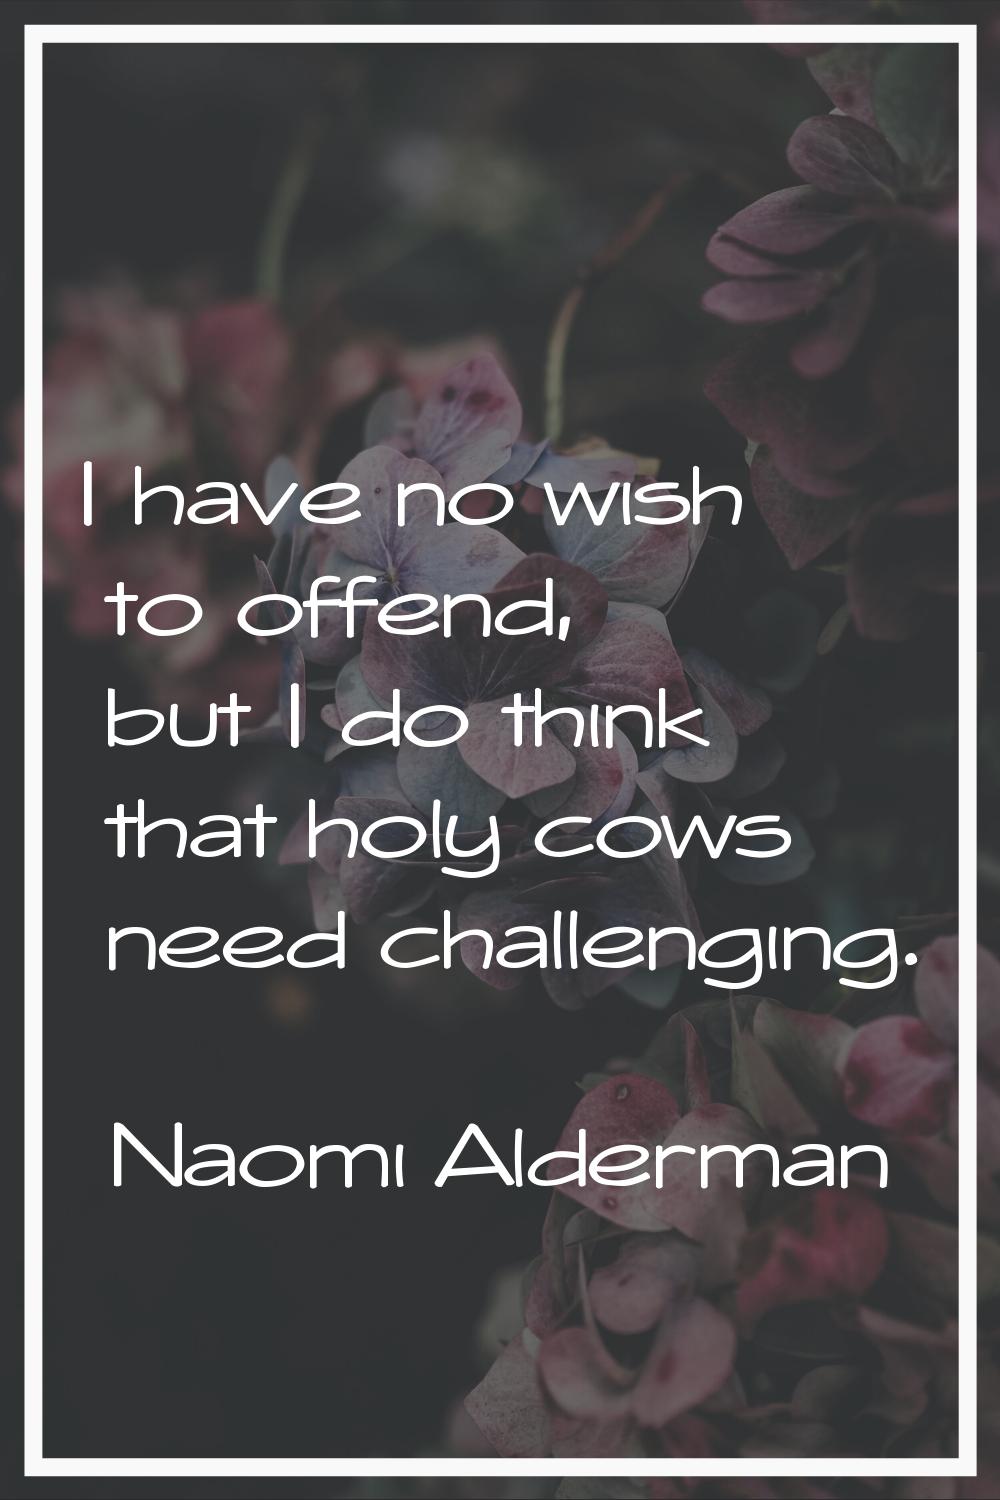 I have no wish to offend, but I do think that holy cows need challenging.